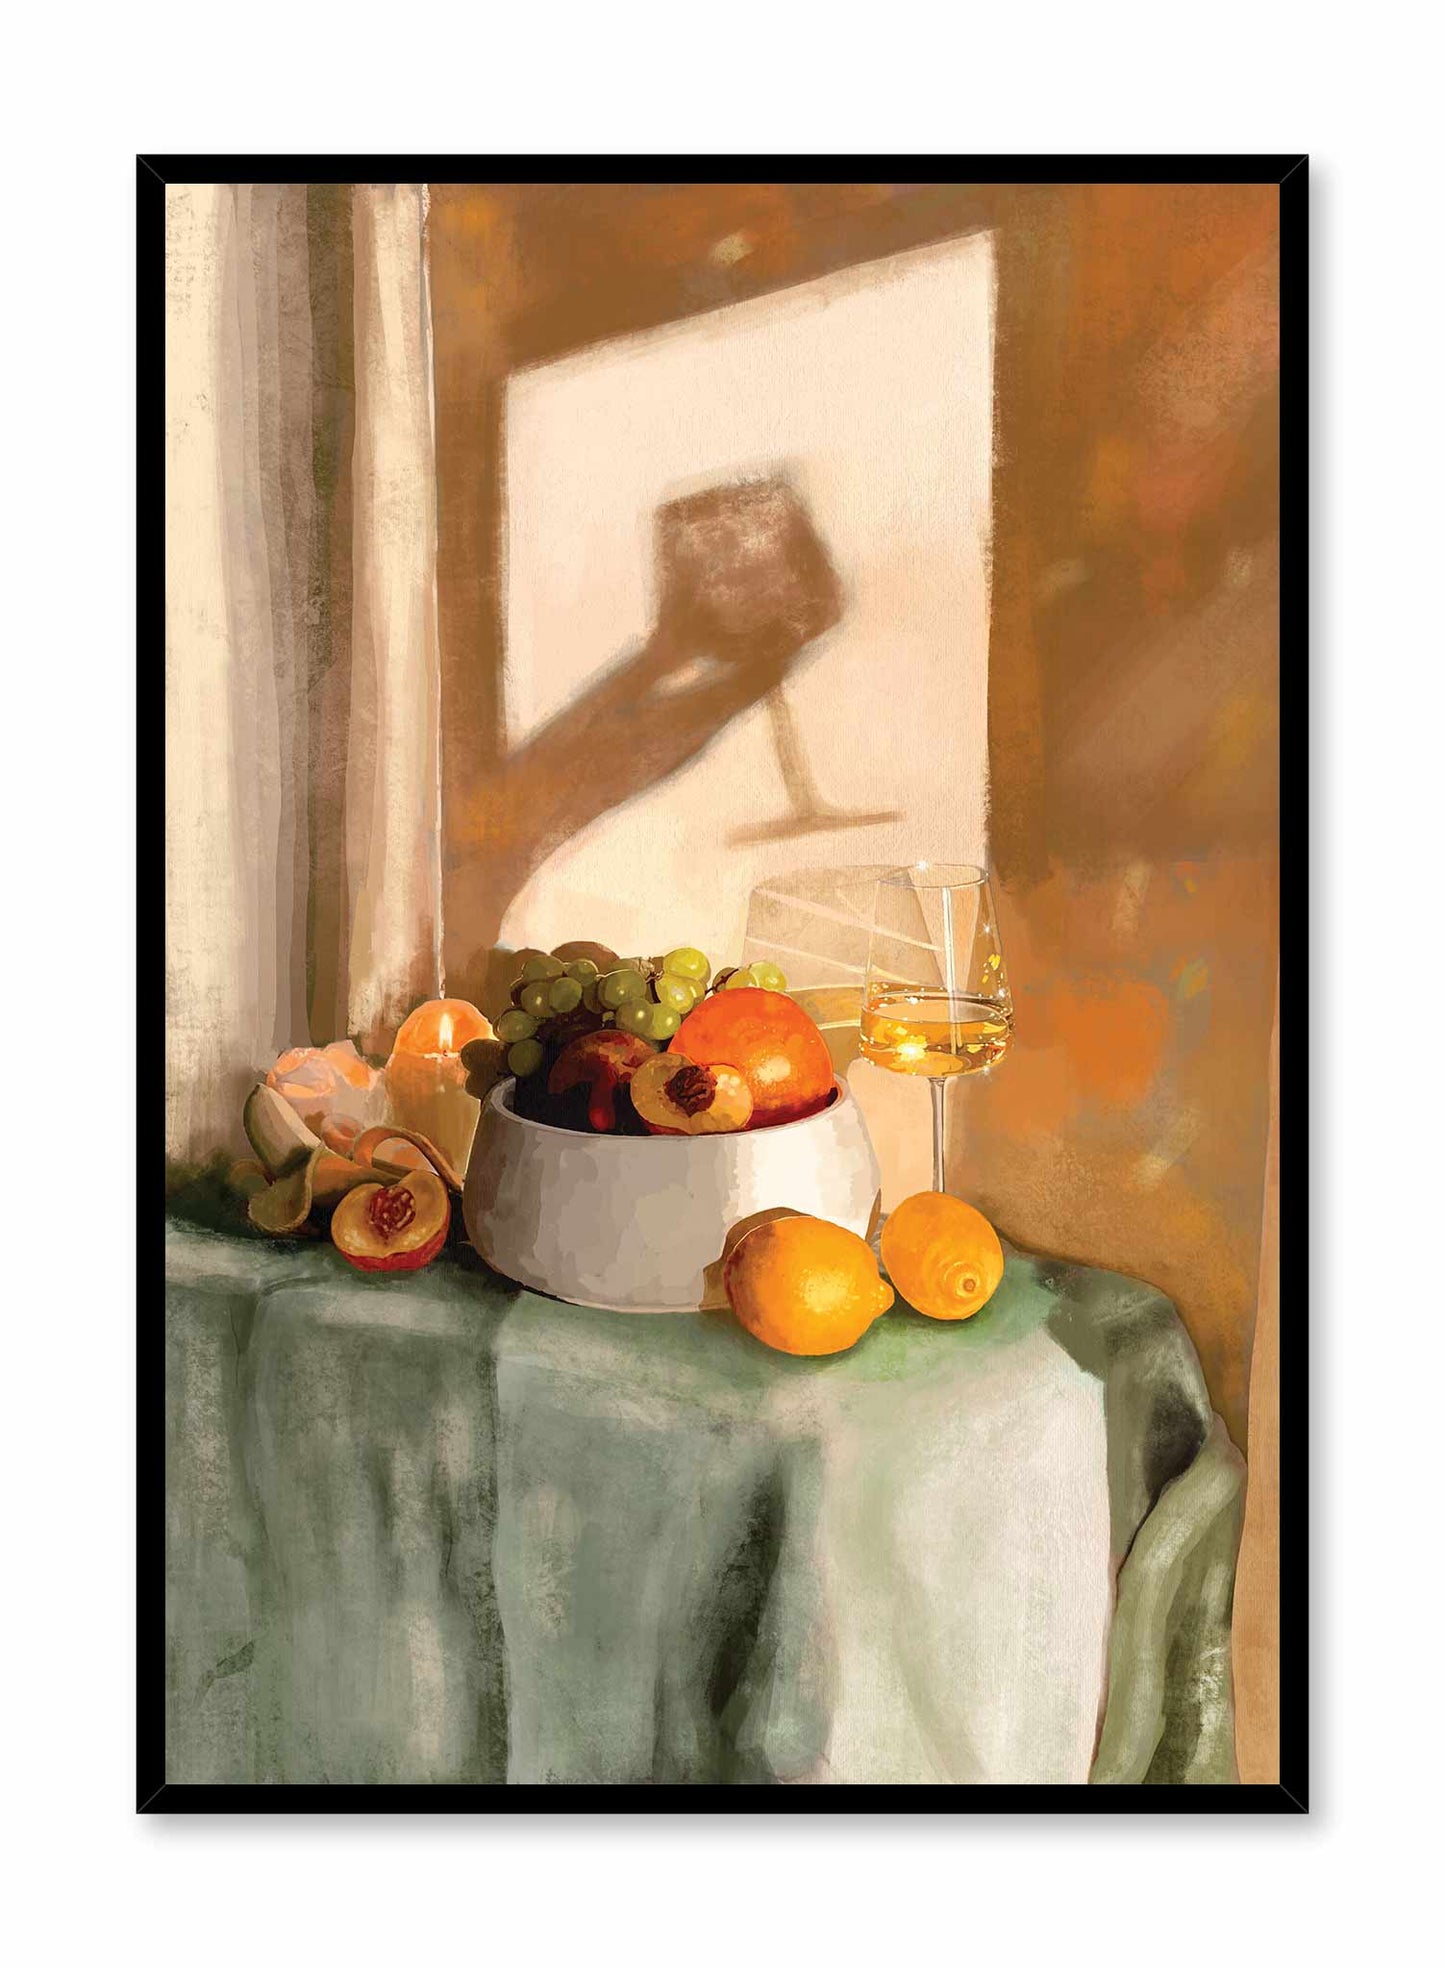 Cheers! is an illustration of the shadow of a hand raising a glass against a table with a bowl of fruits next to a glass of white wine by Audrey Rivet in collaboration with Opposite Wall.